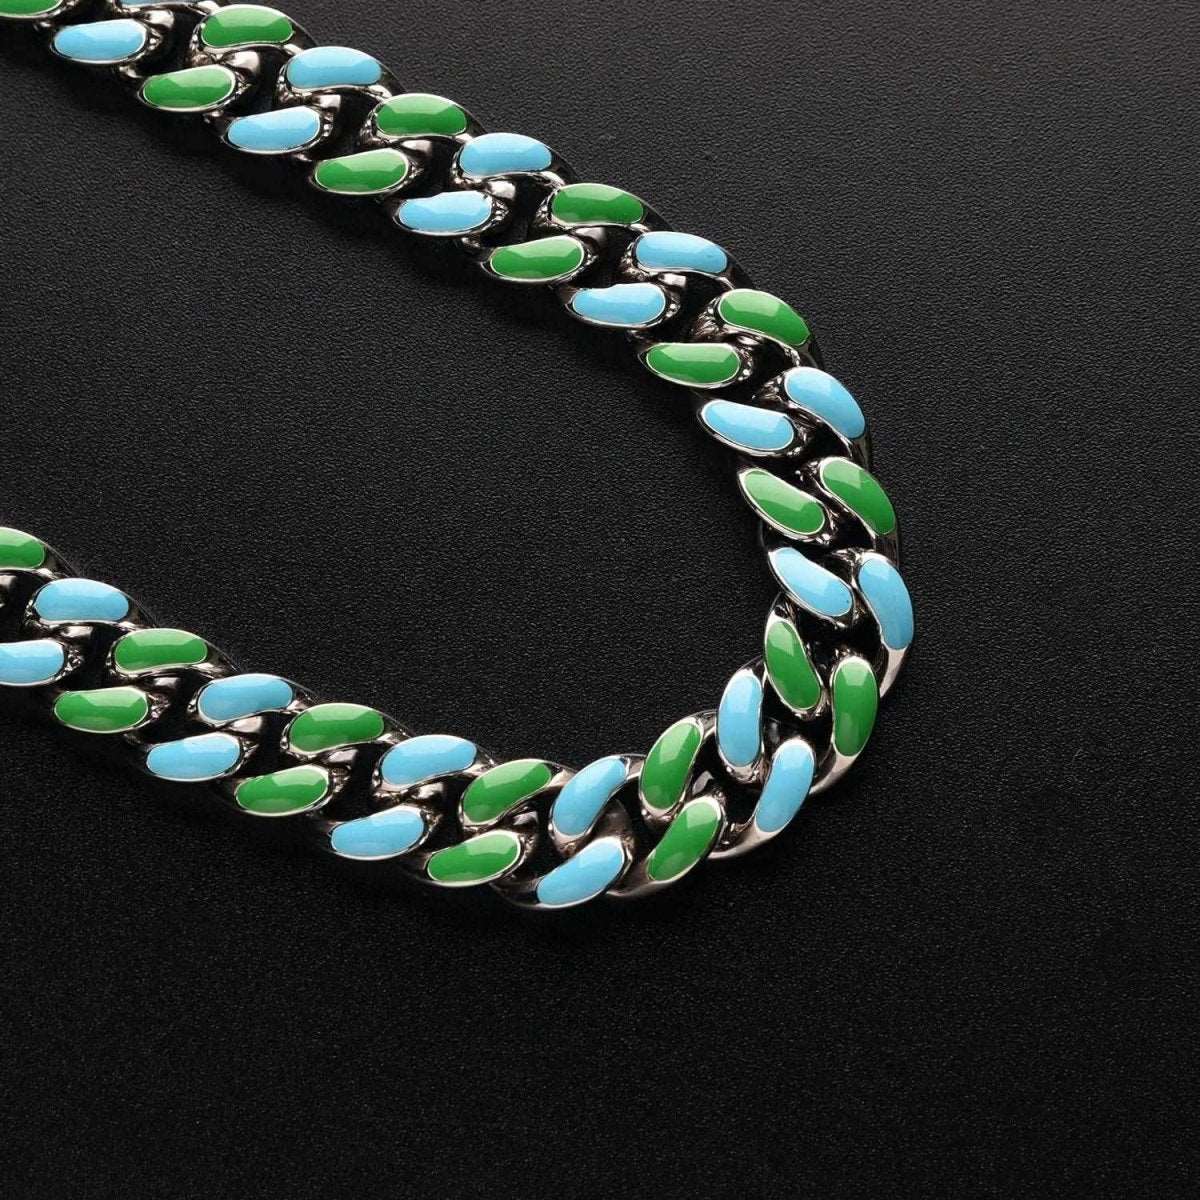 10mm Oil Dripped Enamel Cuban Link Chain and Bracelet - Uniquely You Online - Chain and Bracelet